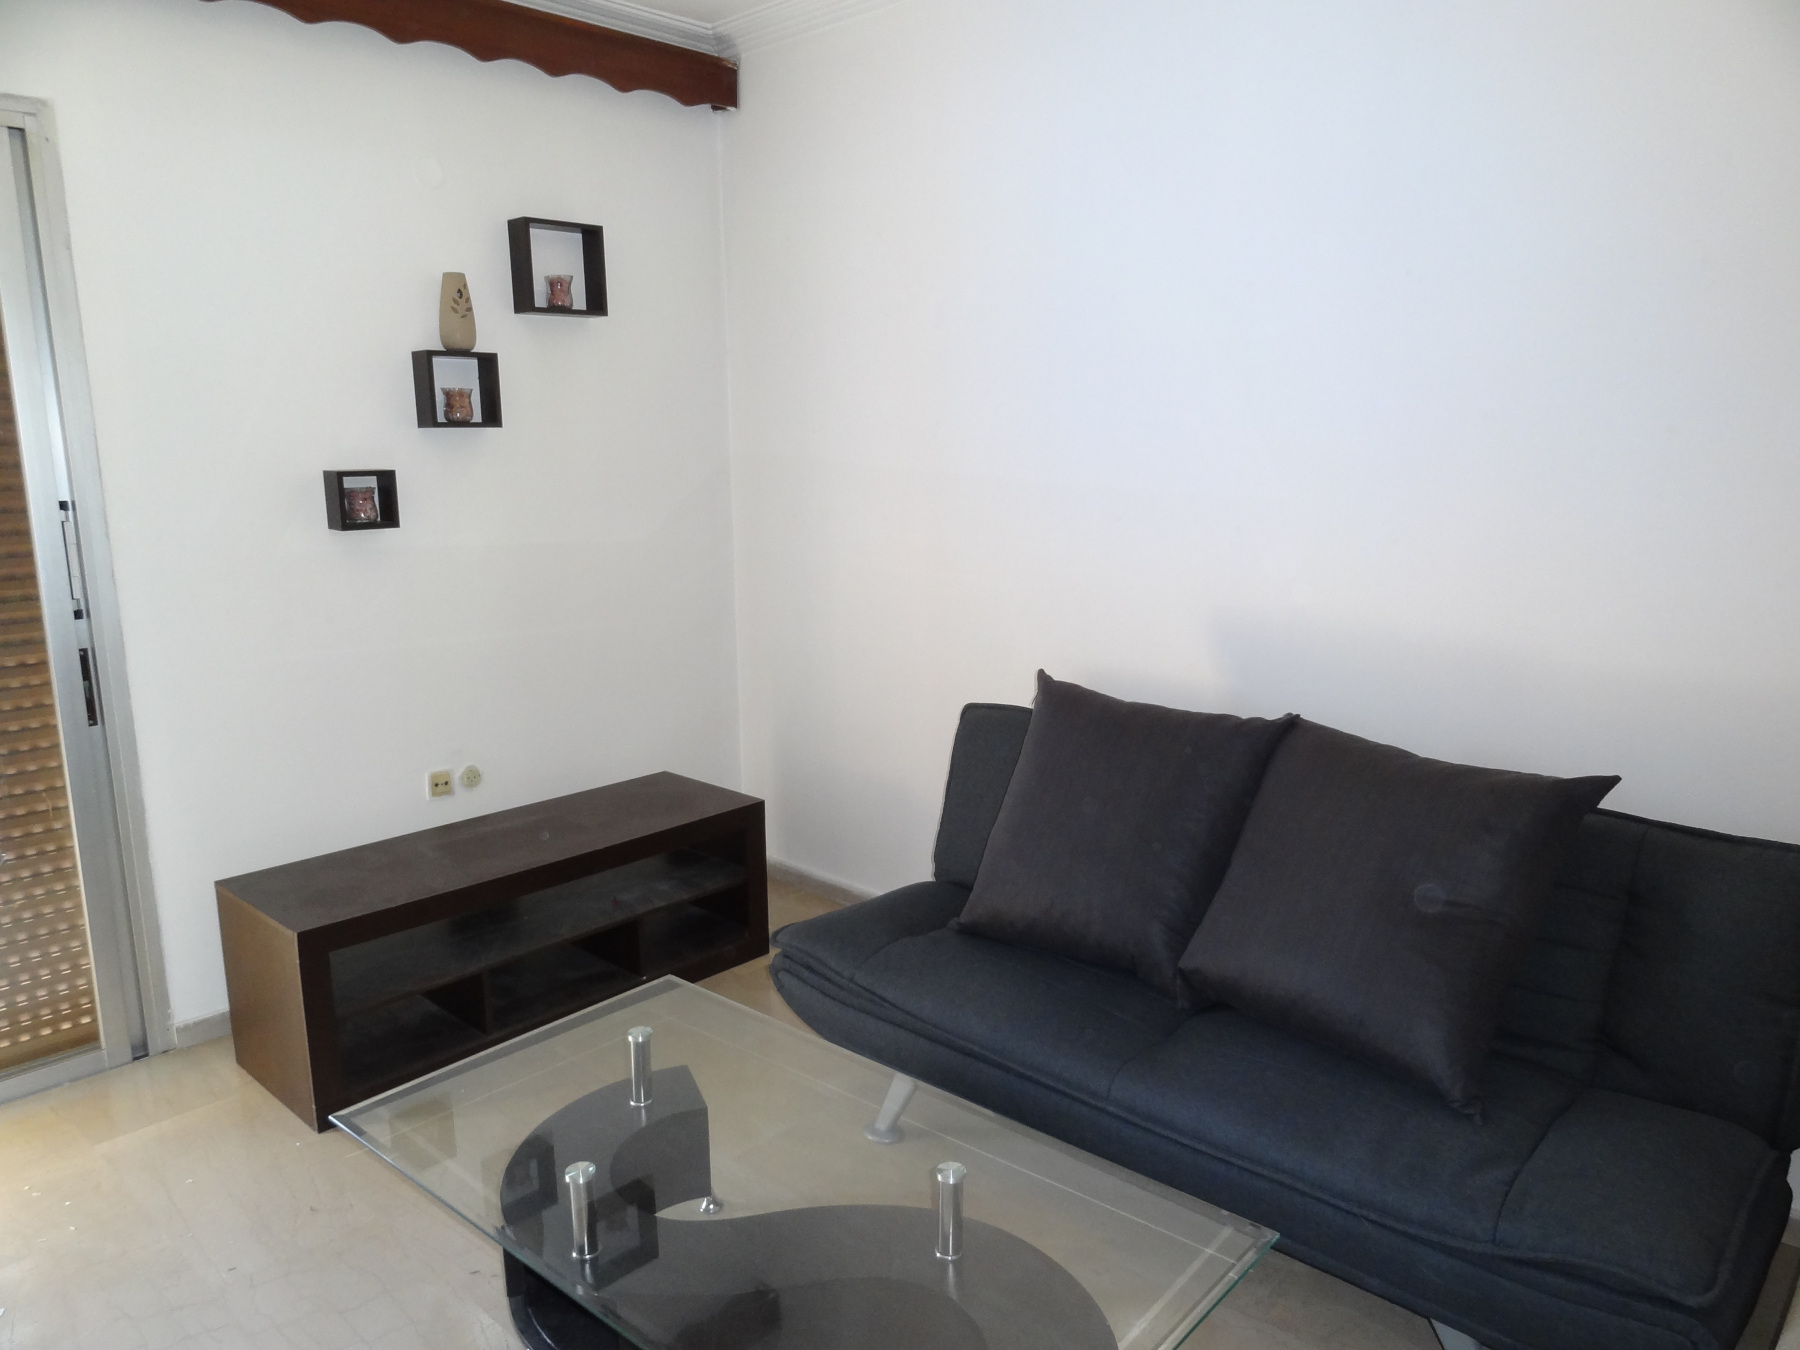 Furnished 2 bedrooms apartment for rent, 81 sq.m. 3rd floor in the center of Ioannina